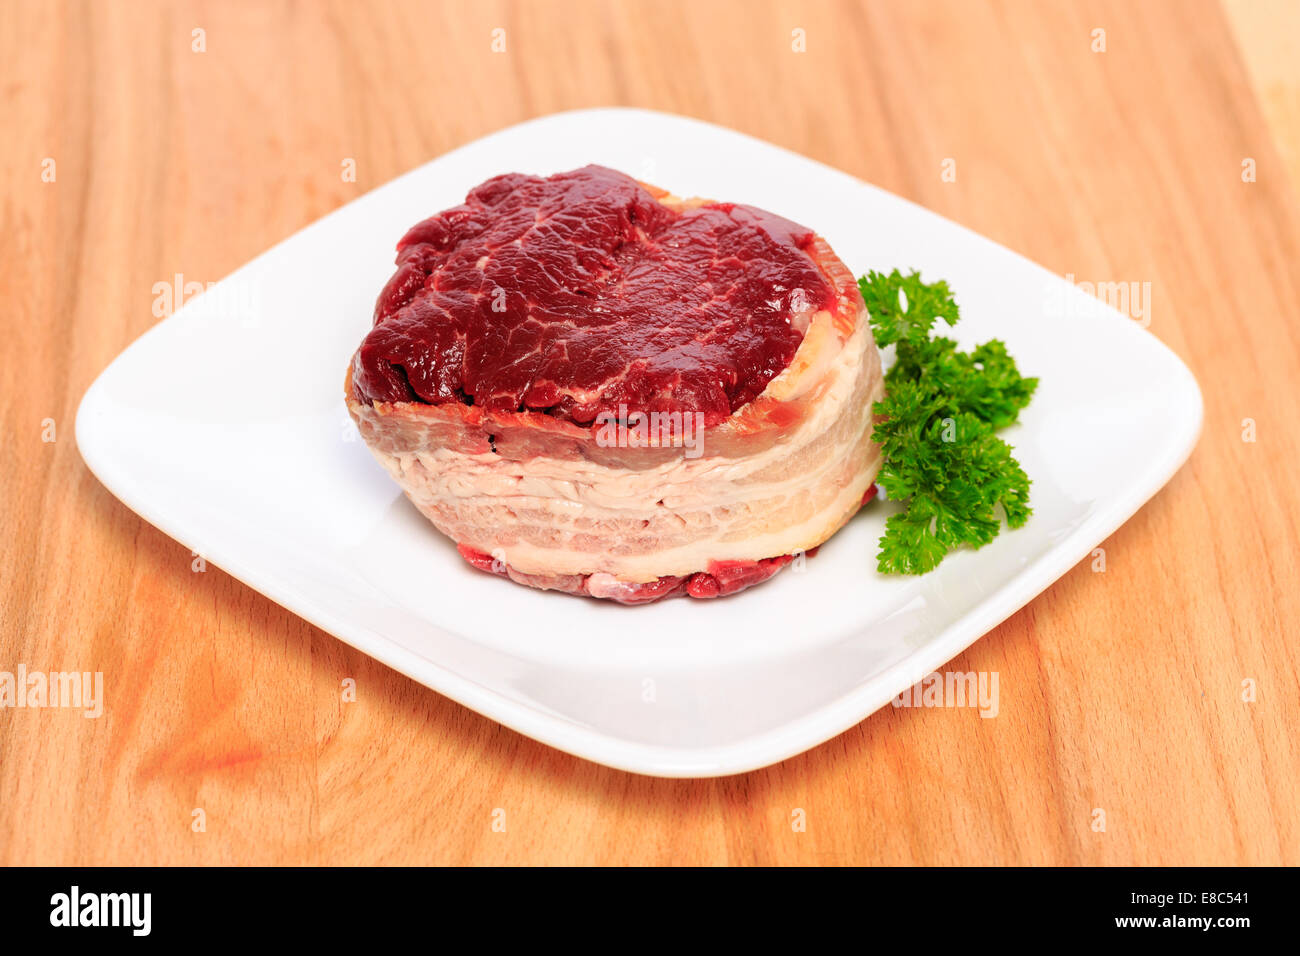 Two 8oz filet mignon beef steaks wrapped with bacon on a wood cutting board. Stock Photo